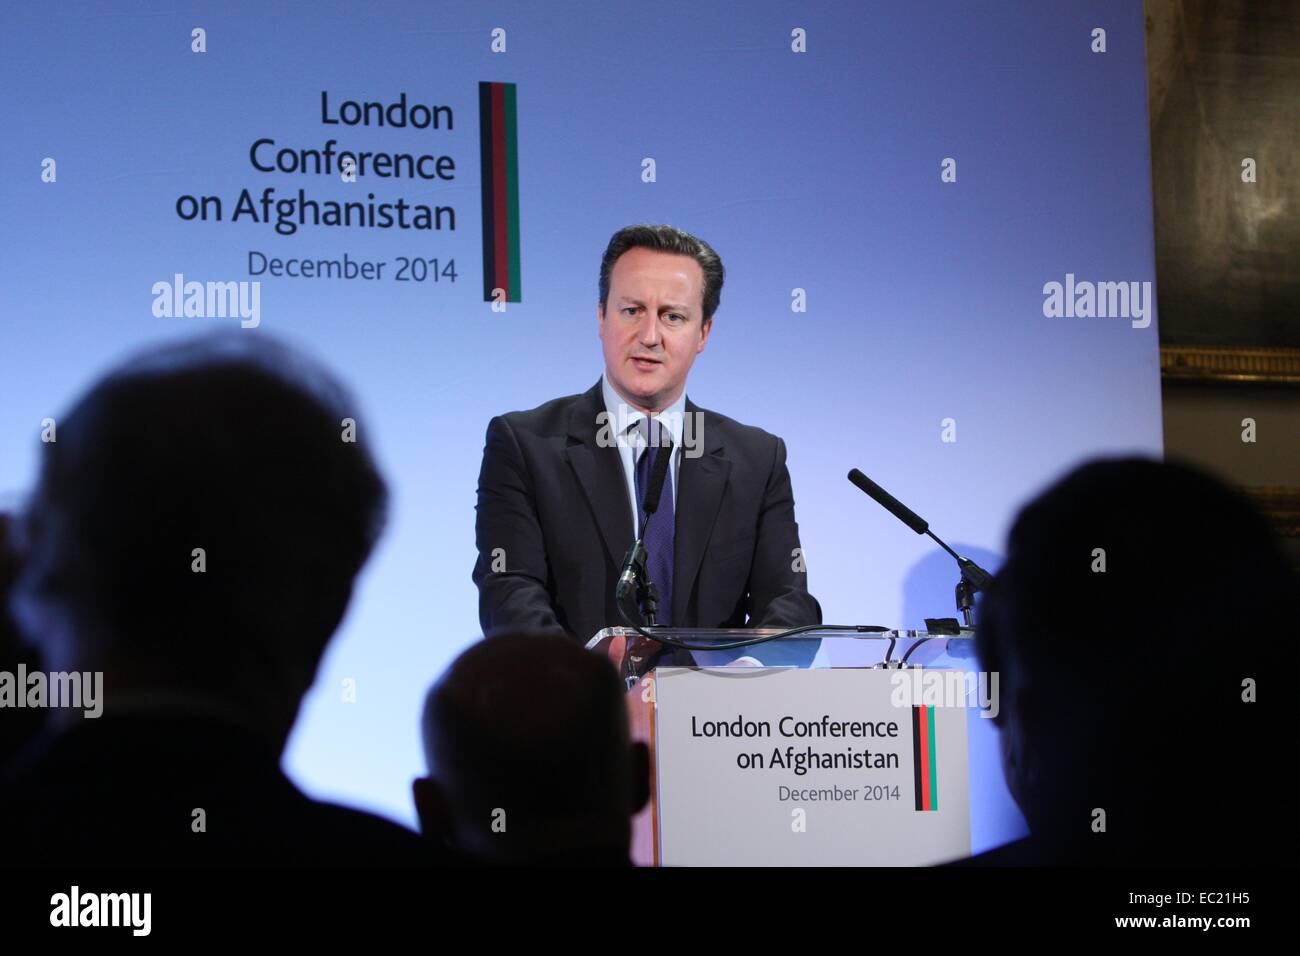 British Prime Minister David Cameron during a press conference following the London Conference on Afghanistan December 4, 2014 in London. Stock Photo